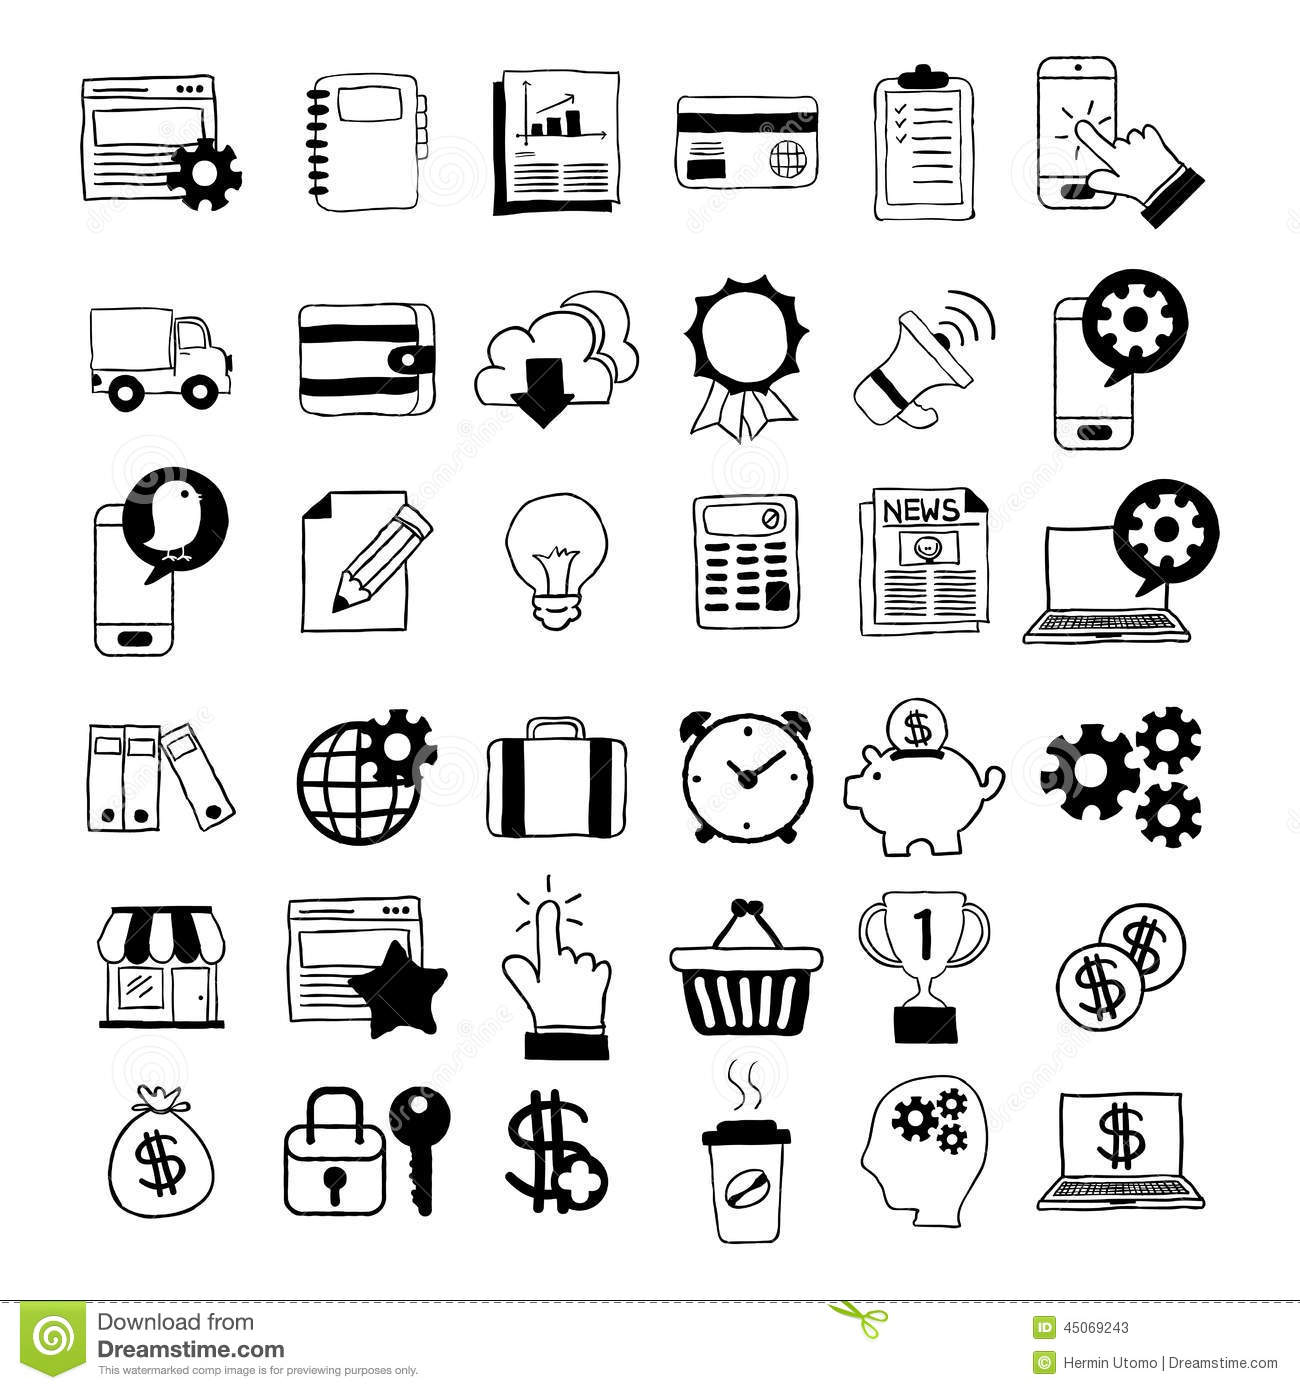 Hand Drawn Business Icons